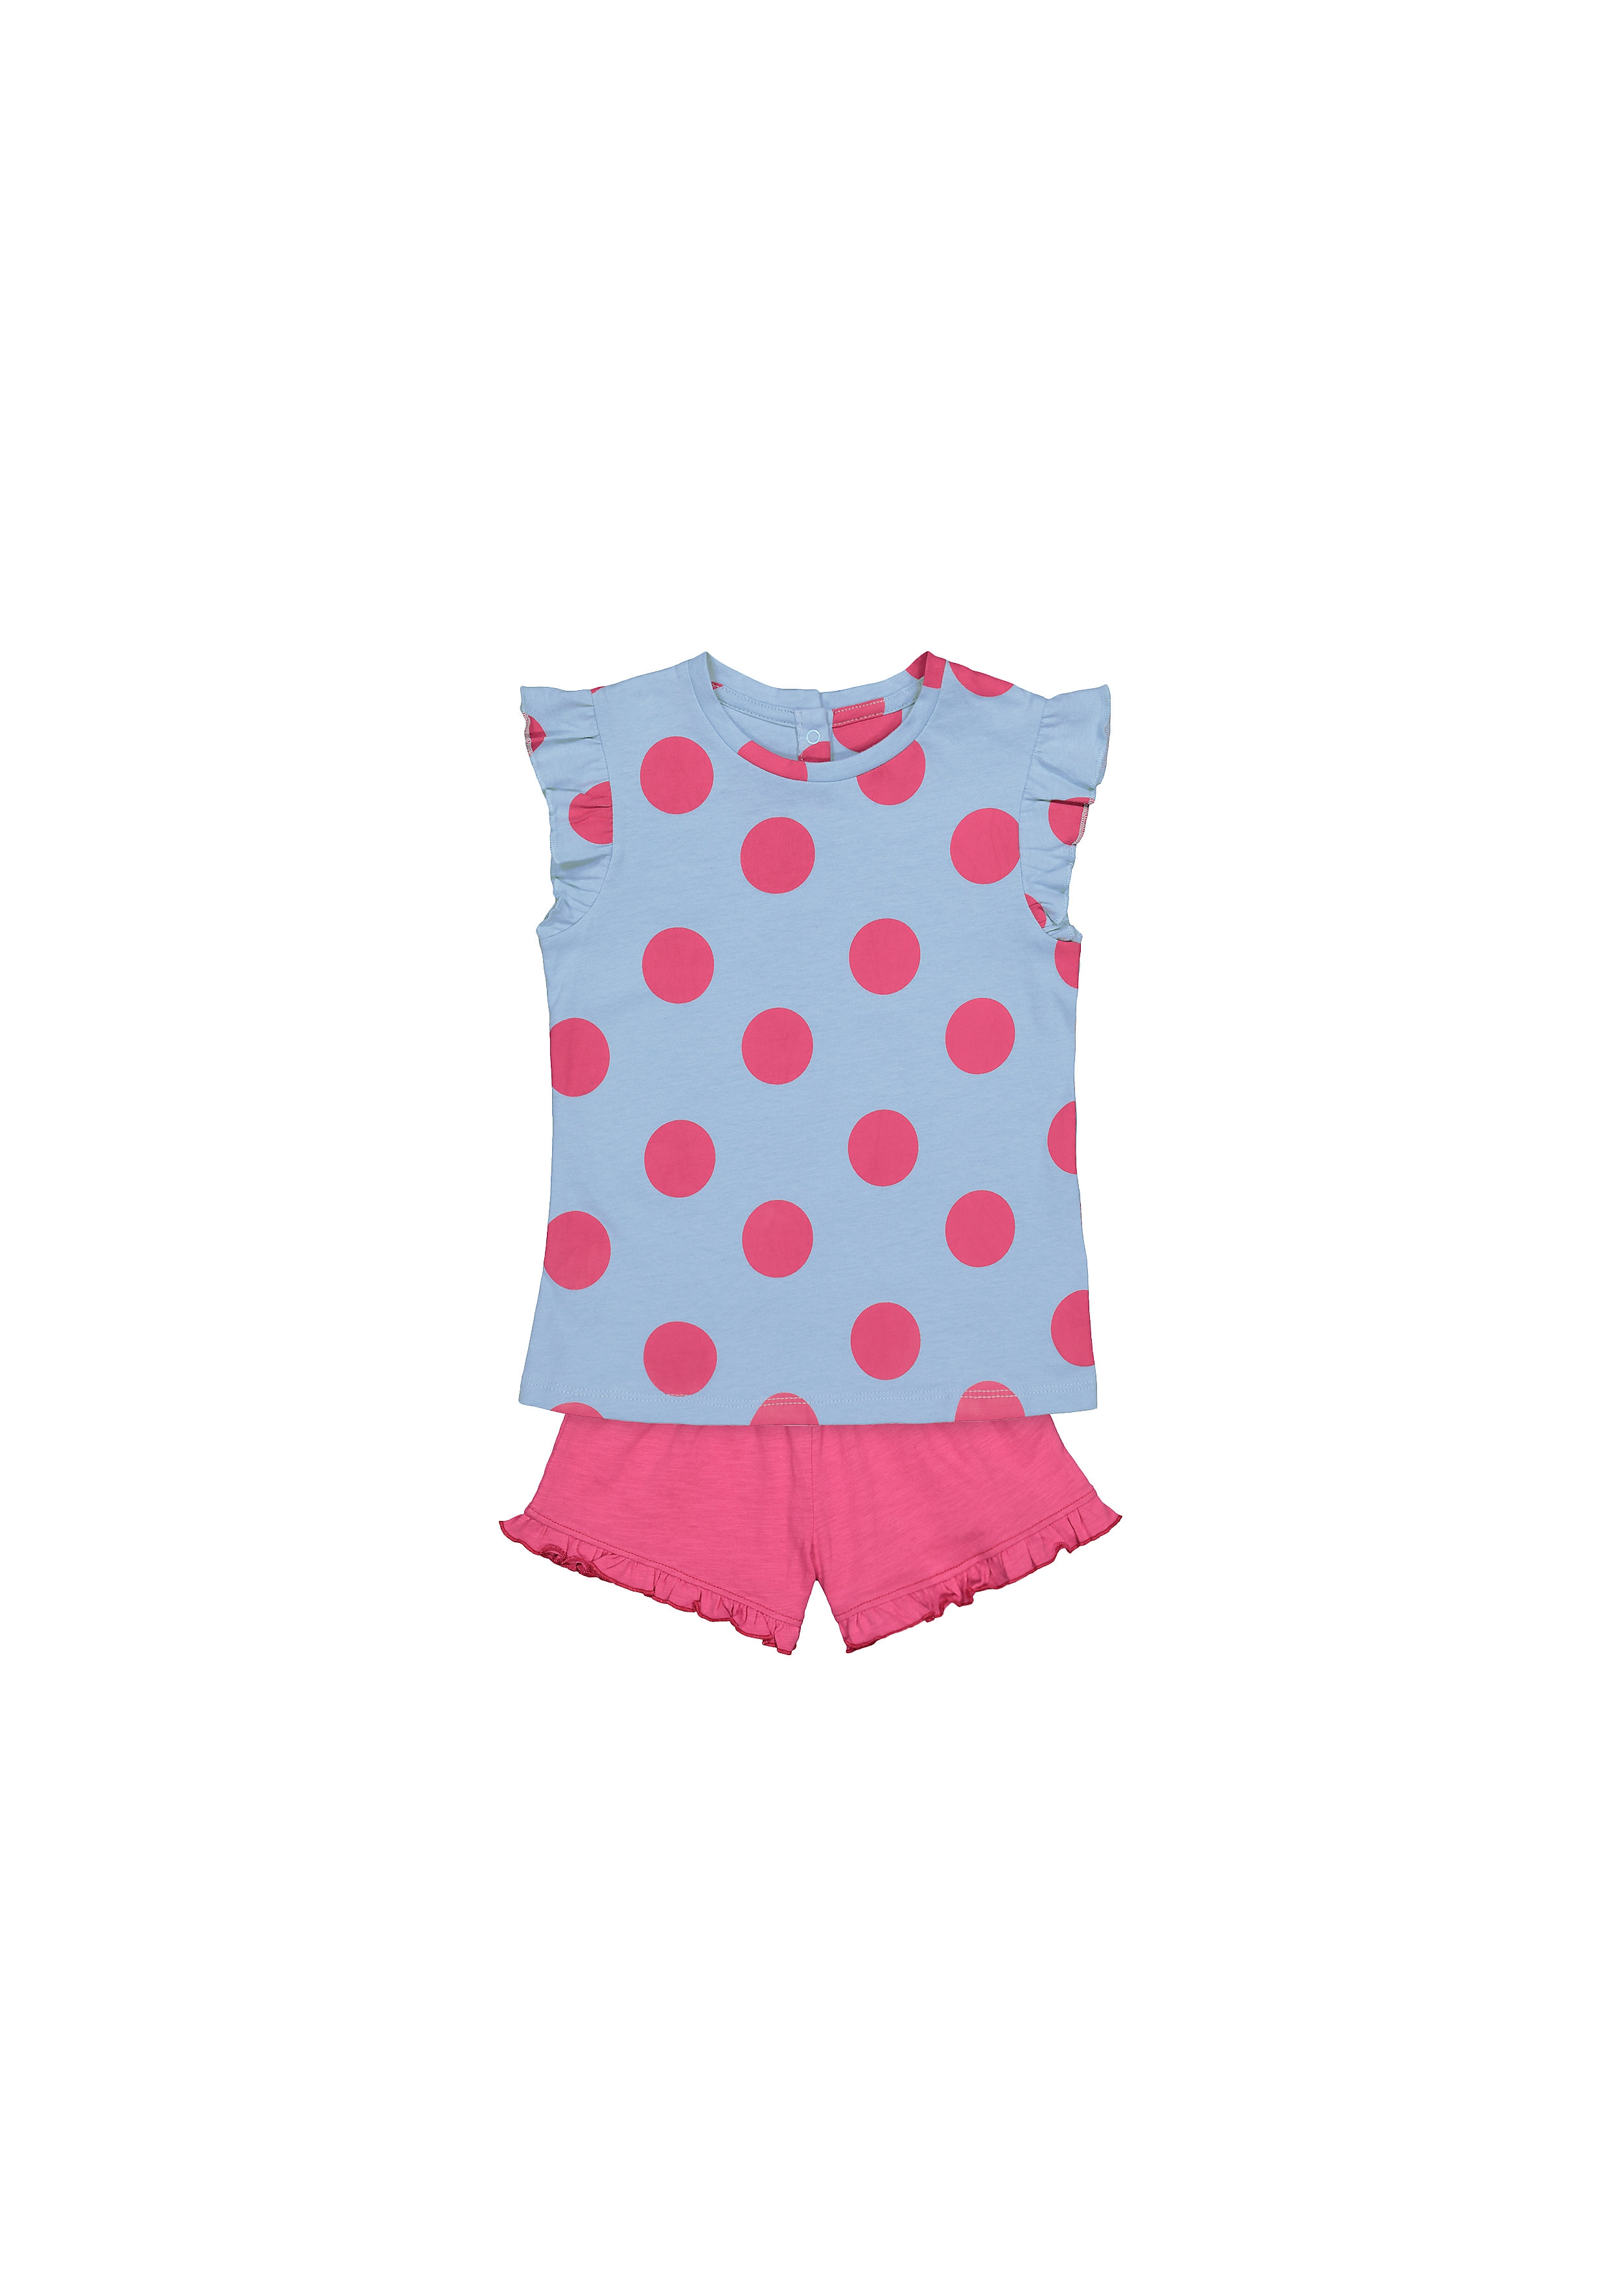 Mothercare | Girls Half Sleeves Shorts Sets  - Pack Of 2 - Multicolor